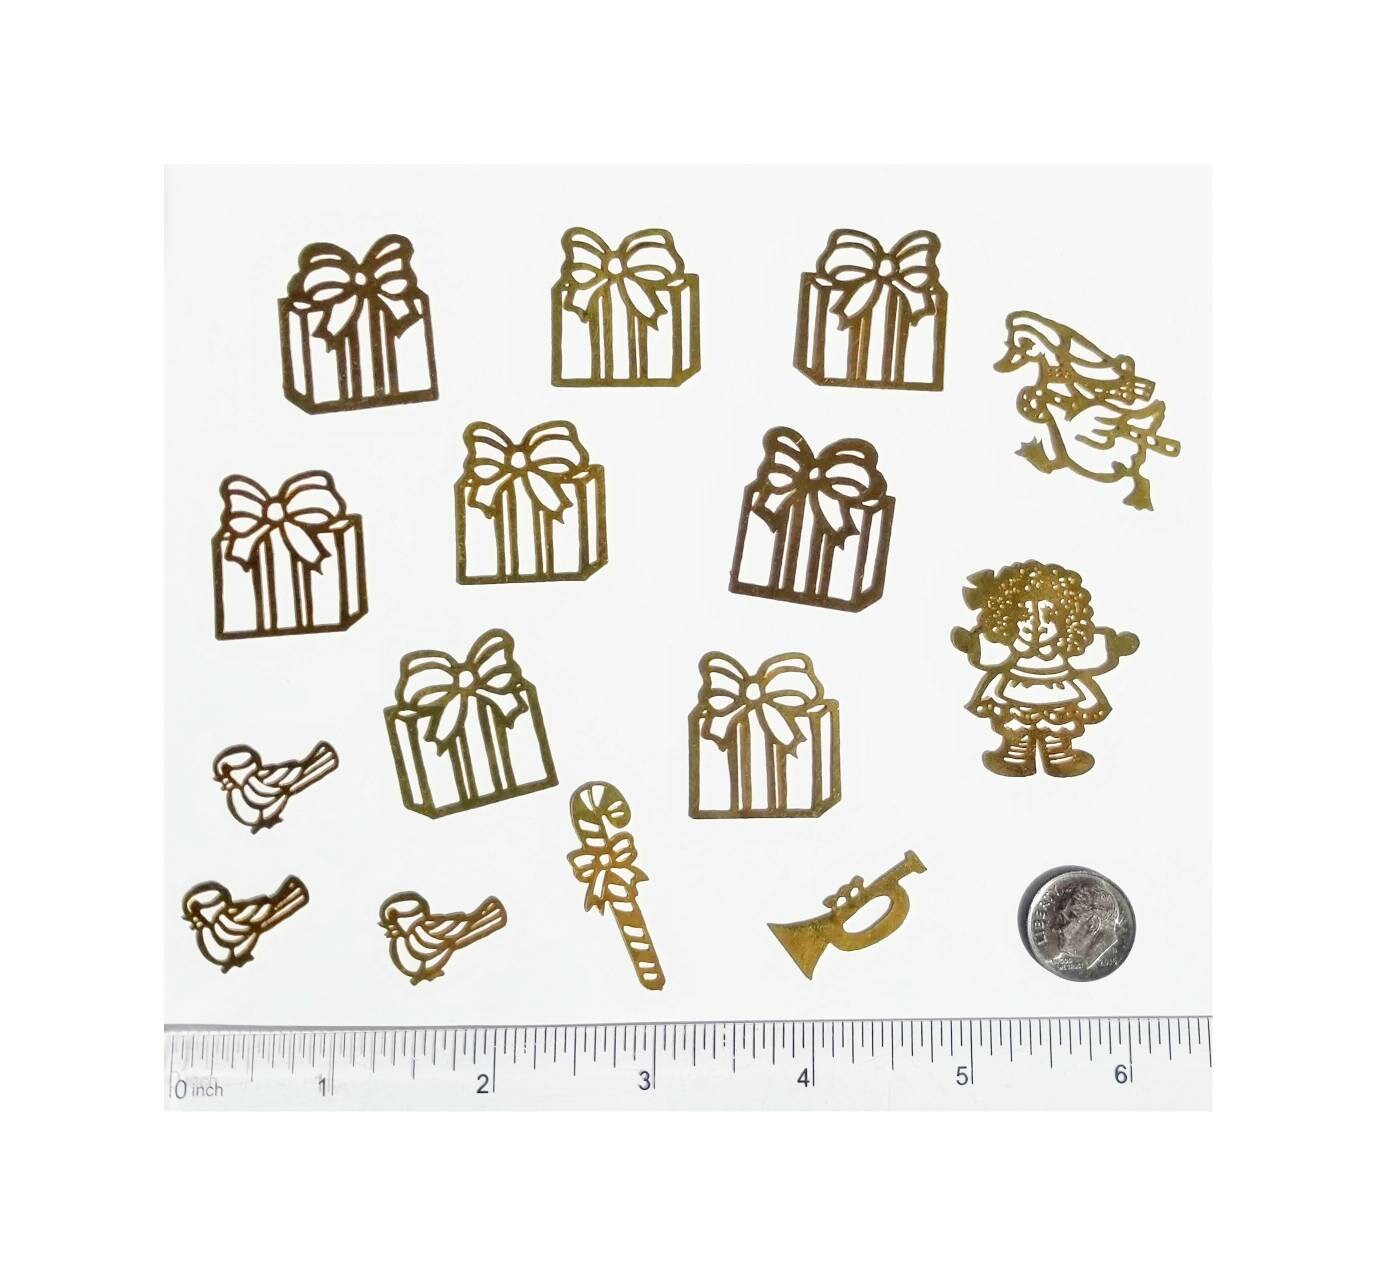 Brass Filigree Embellishments for Stained Glass, Jewelry findings & crafts. Use with ribbon for gift tags. Solder or glue for craft projects